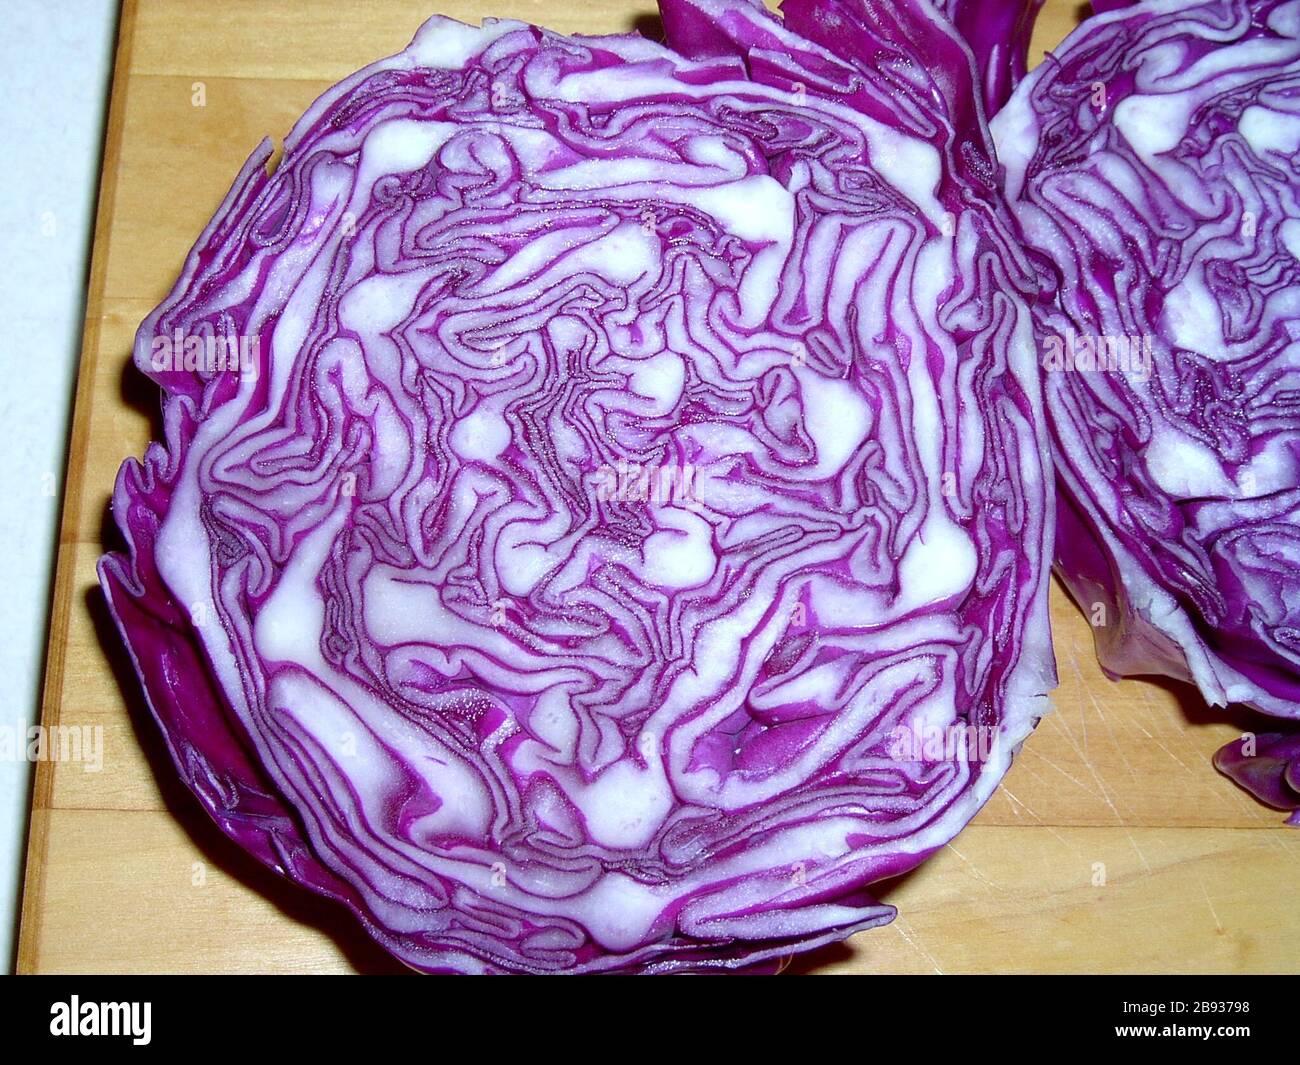 I cut a head of purple cabbage in half and saw this wonderful sight, so I took a and thought should share it with the world. Enjoy this natural fractal.